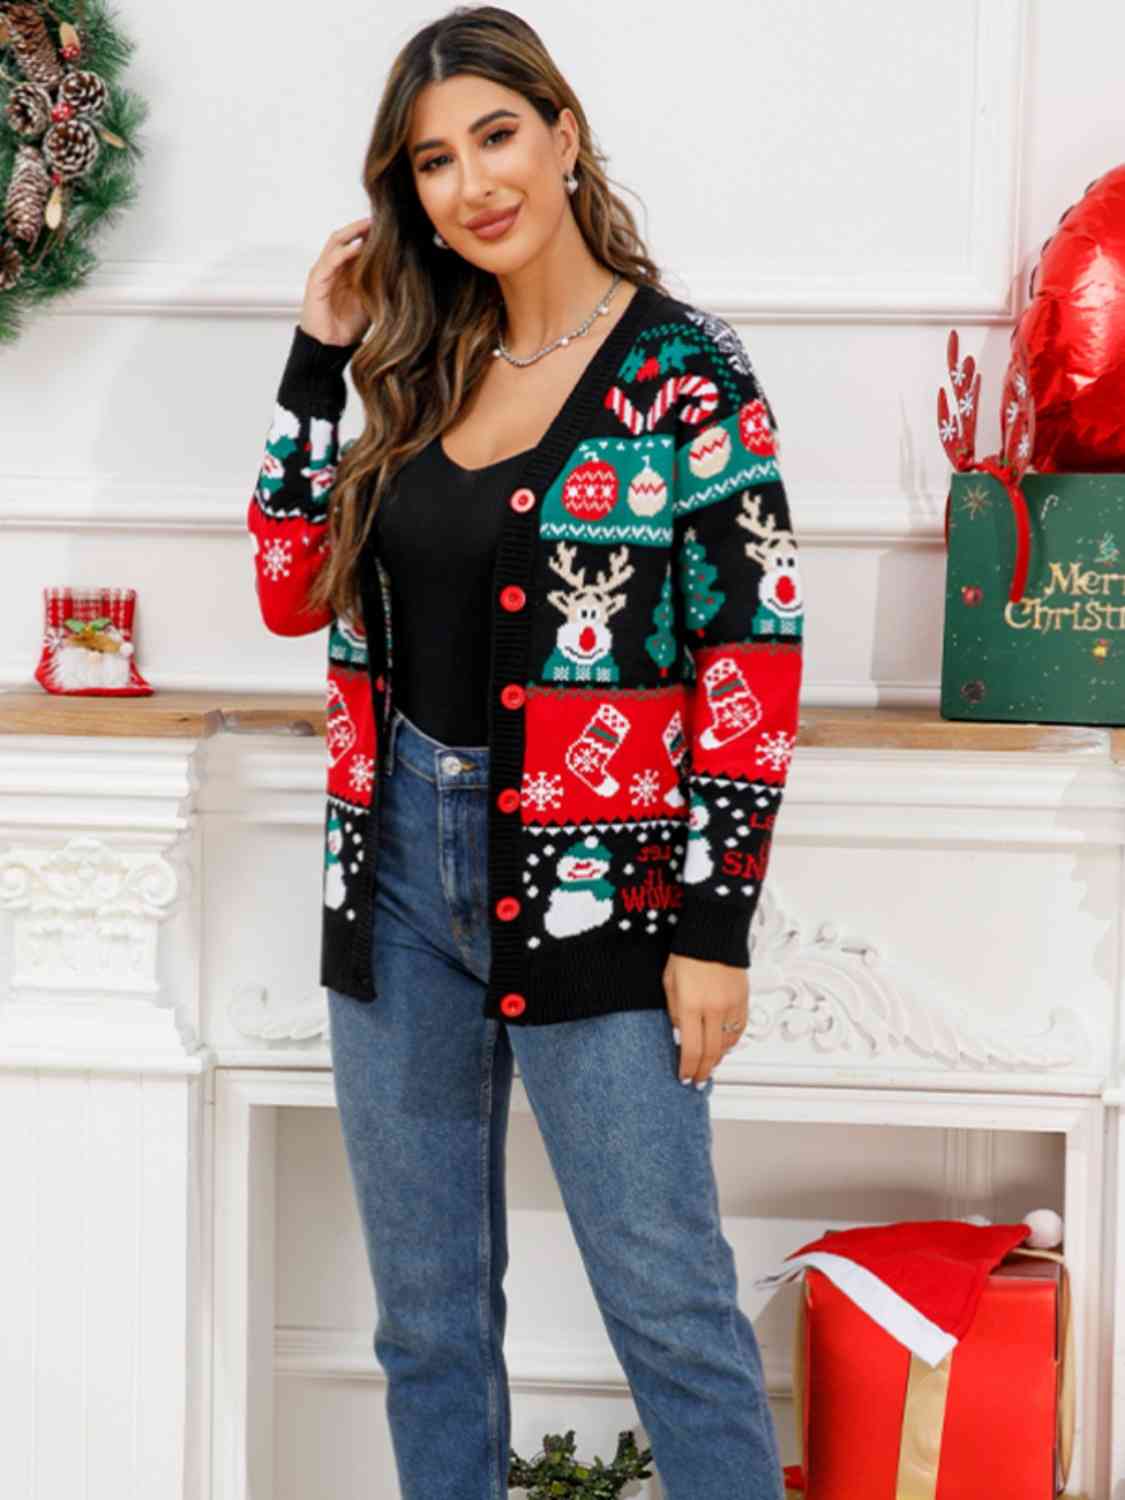 Christmas Button Down Cardigan - Kawaii Stop - Acrylic, Button Down, C.J@MZ, Christmas, Christmas Cardigan, Christmas Gathering, Cozy, Festive Fashion, Holiday Cheer, Imported, Ribbed Texture, Seasonal Style, Ship From Overseas, Women's Fashion